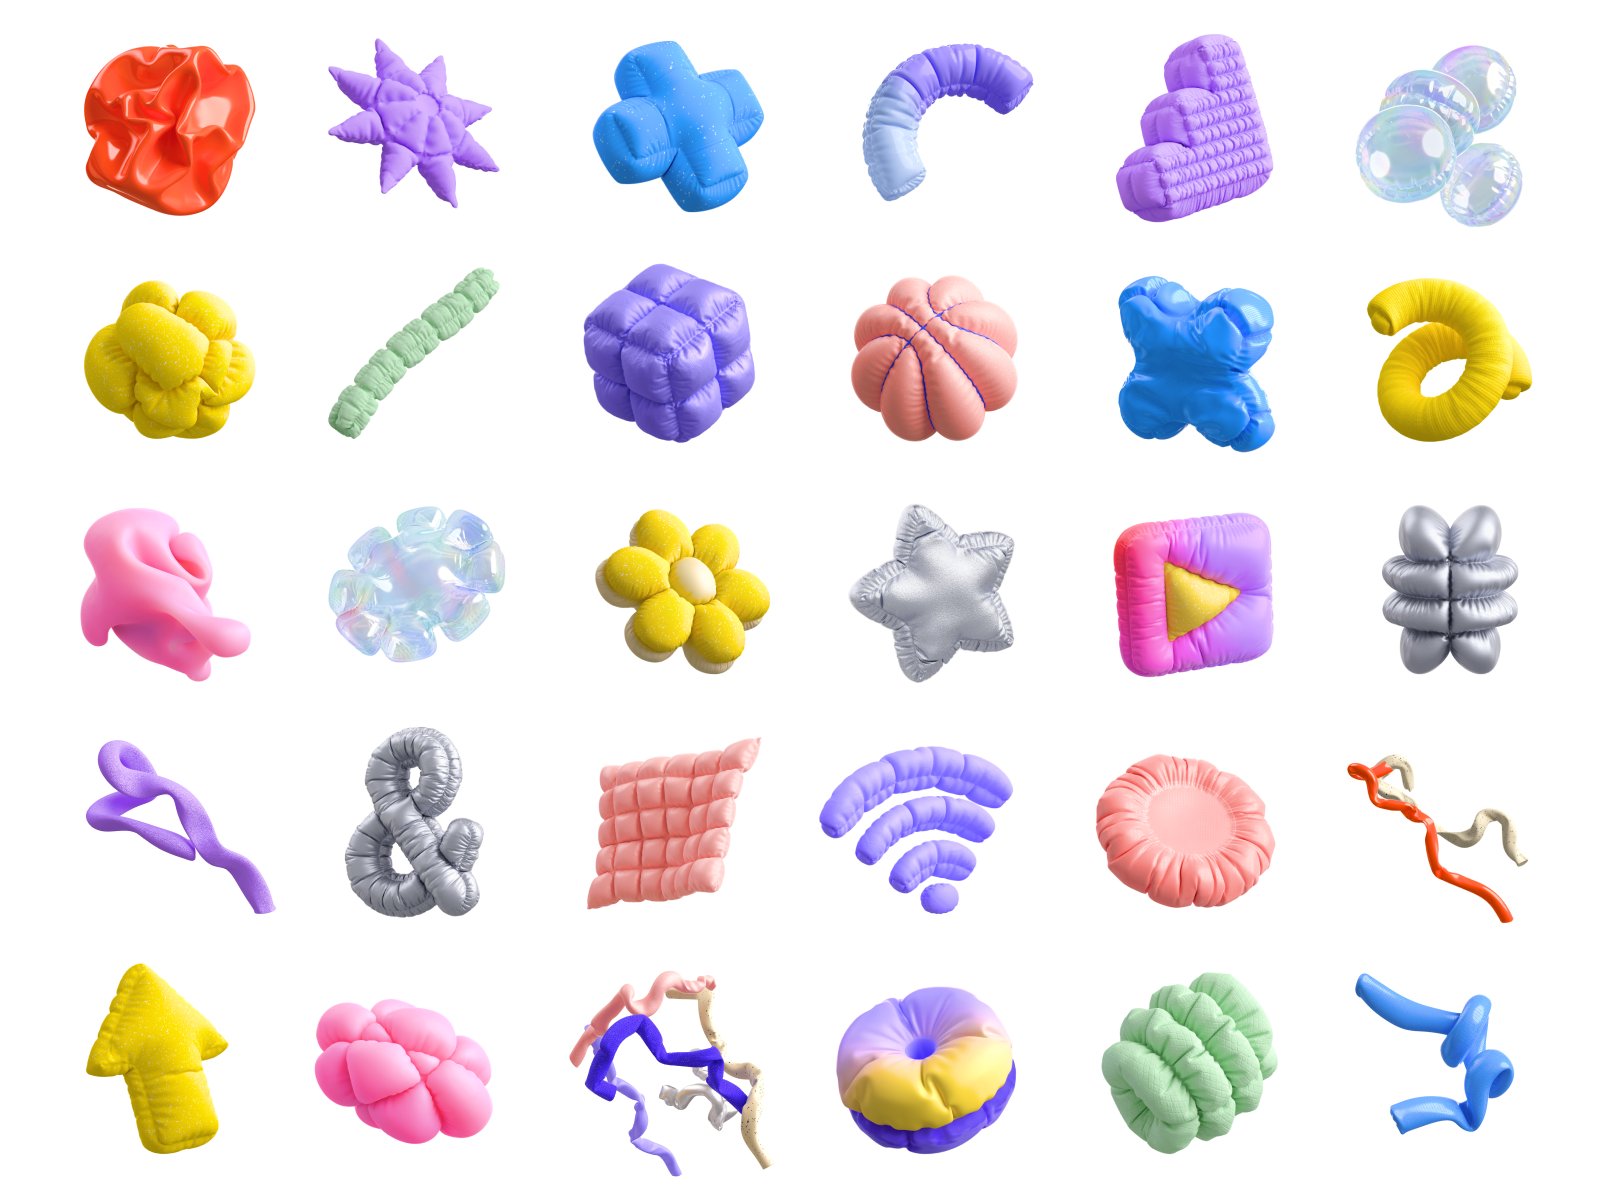 Inflatable abstract 3d illustrations